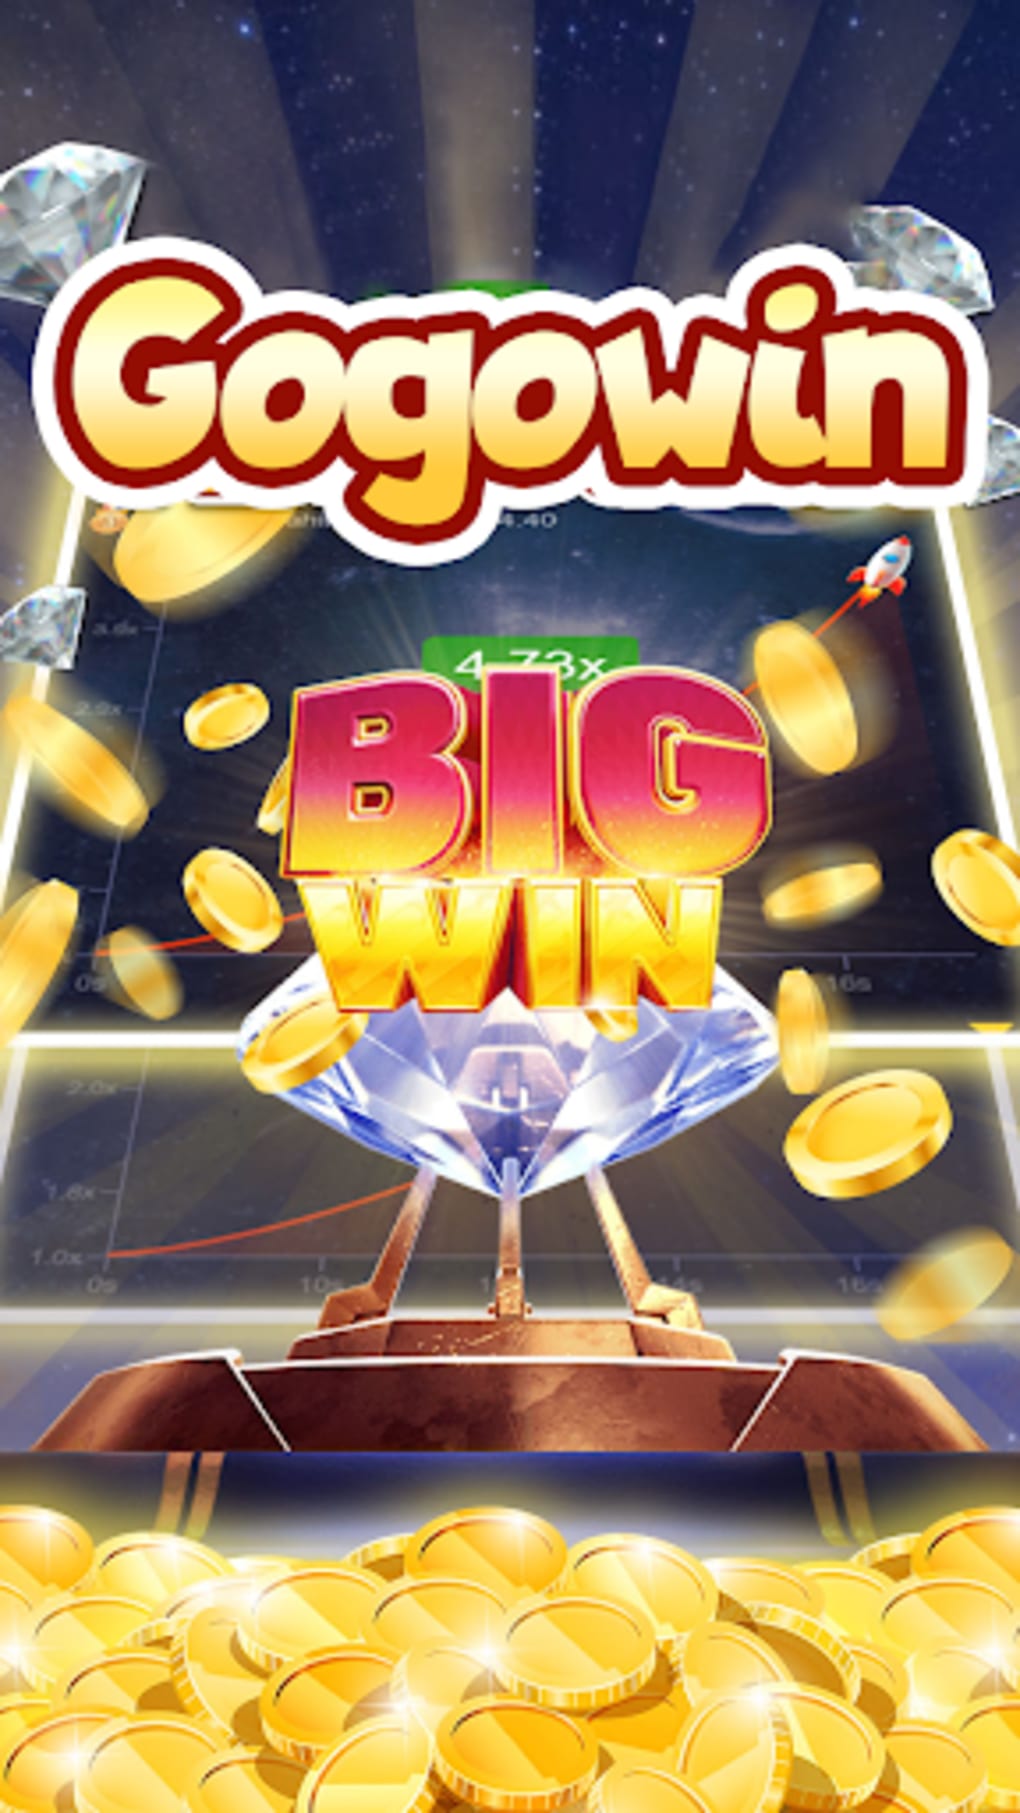 gogowin